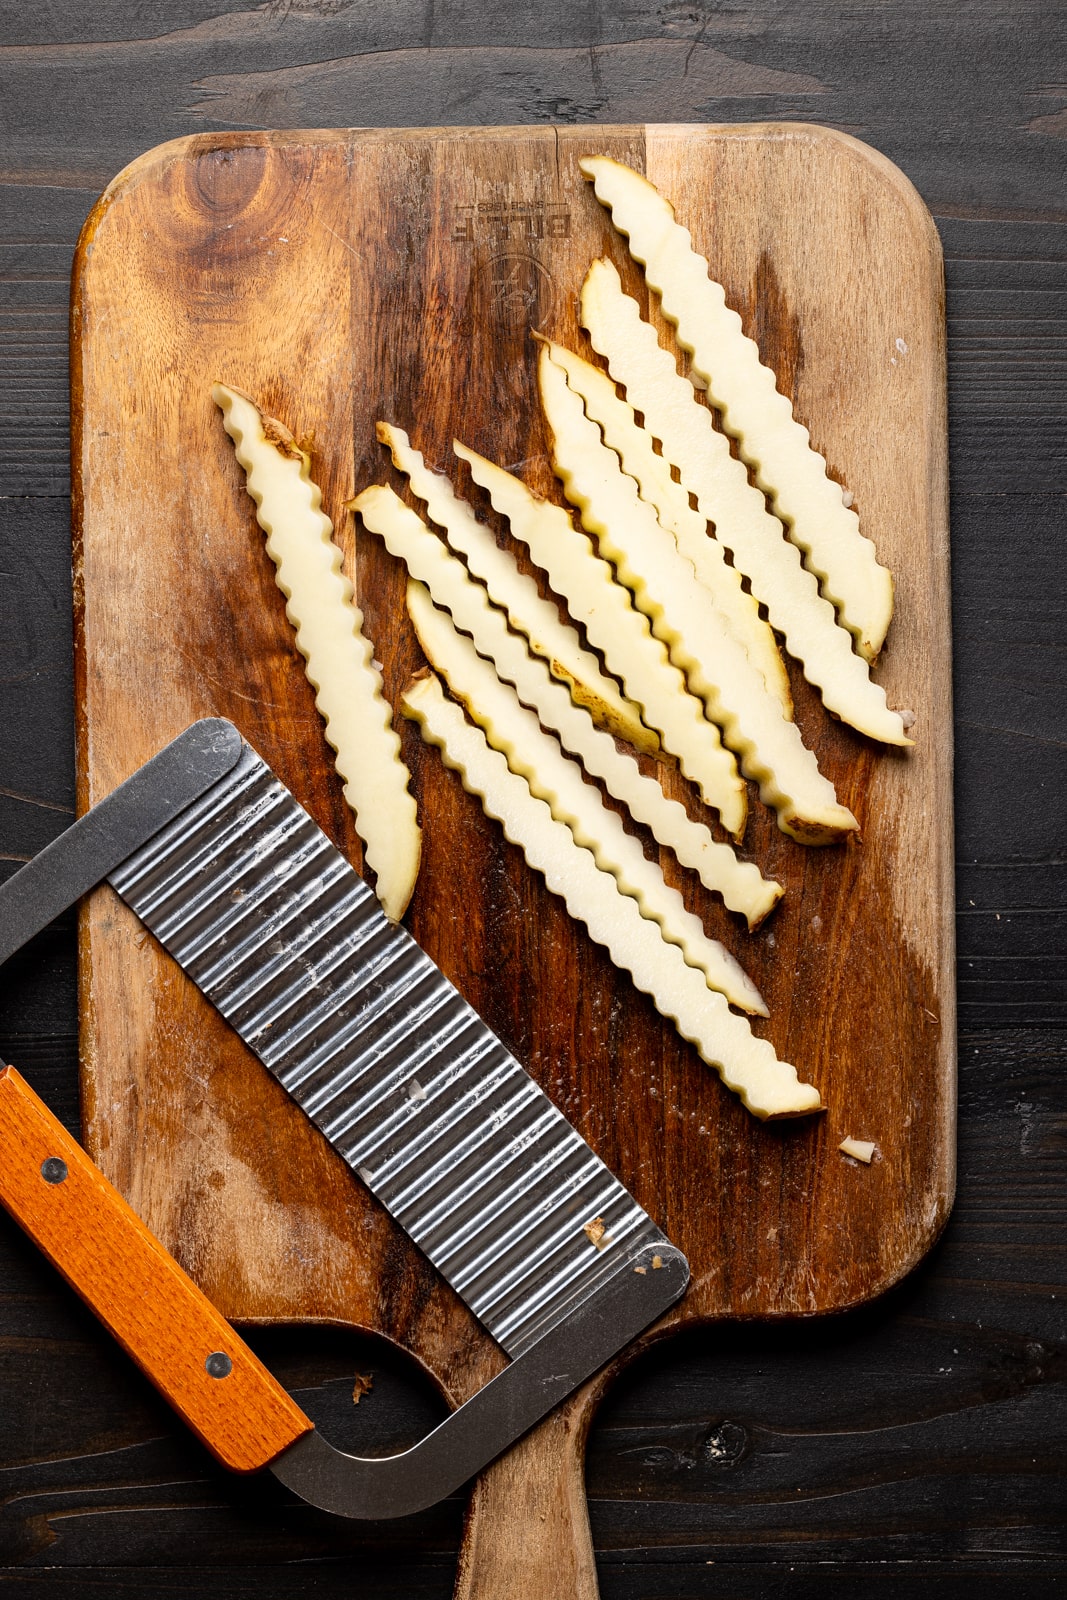 Fries cut into crinkled shape using crinkle cut tool on a cutting board on a black wood table.